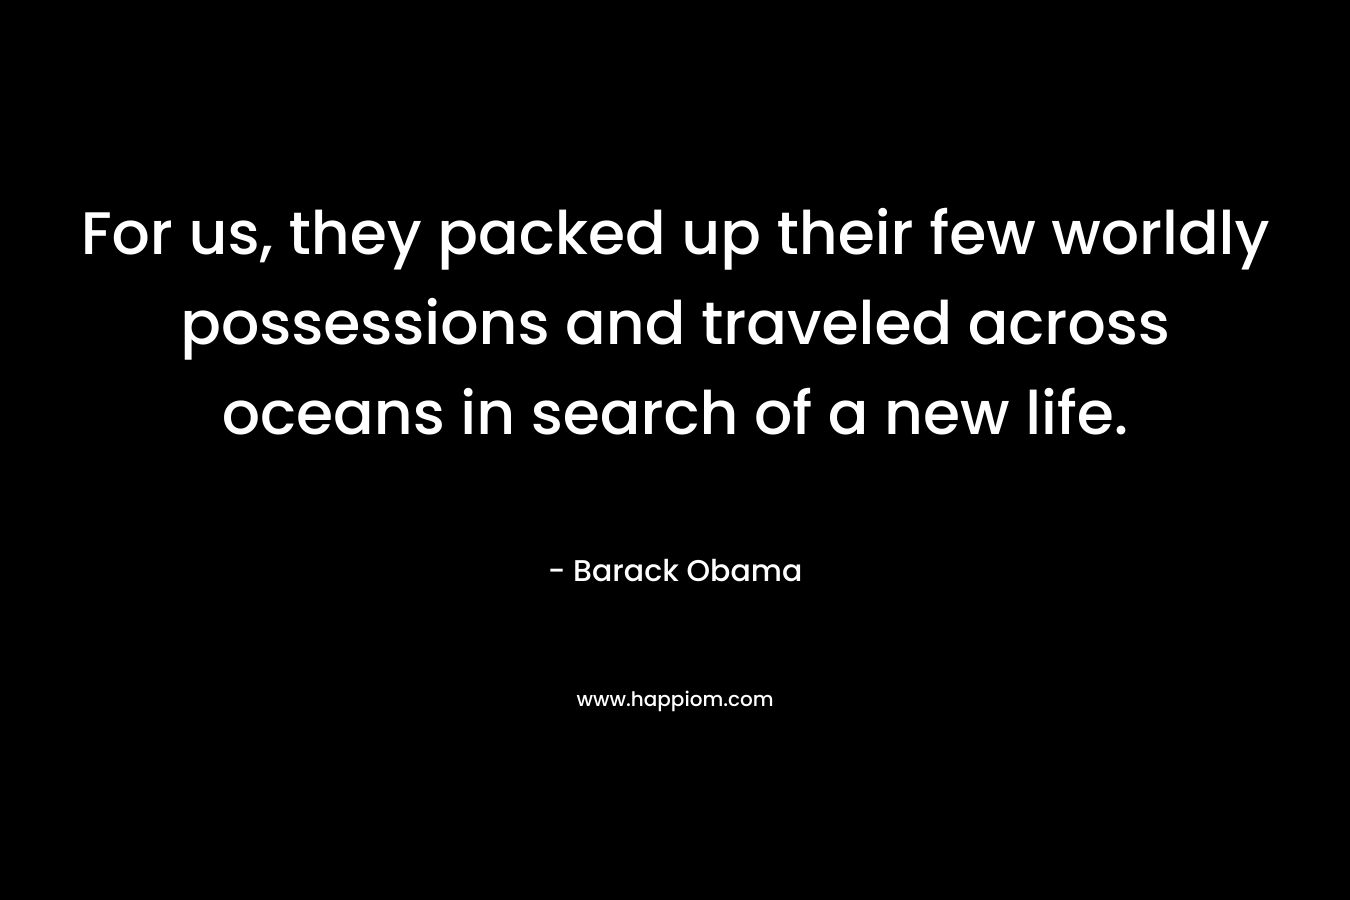 For us, they packed up their few worldly possessions and traveled across oceans in search of a new life. – Barack Obama